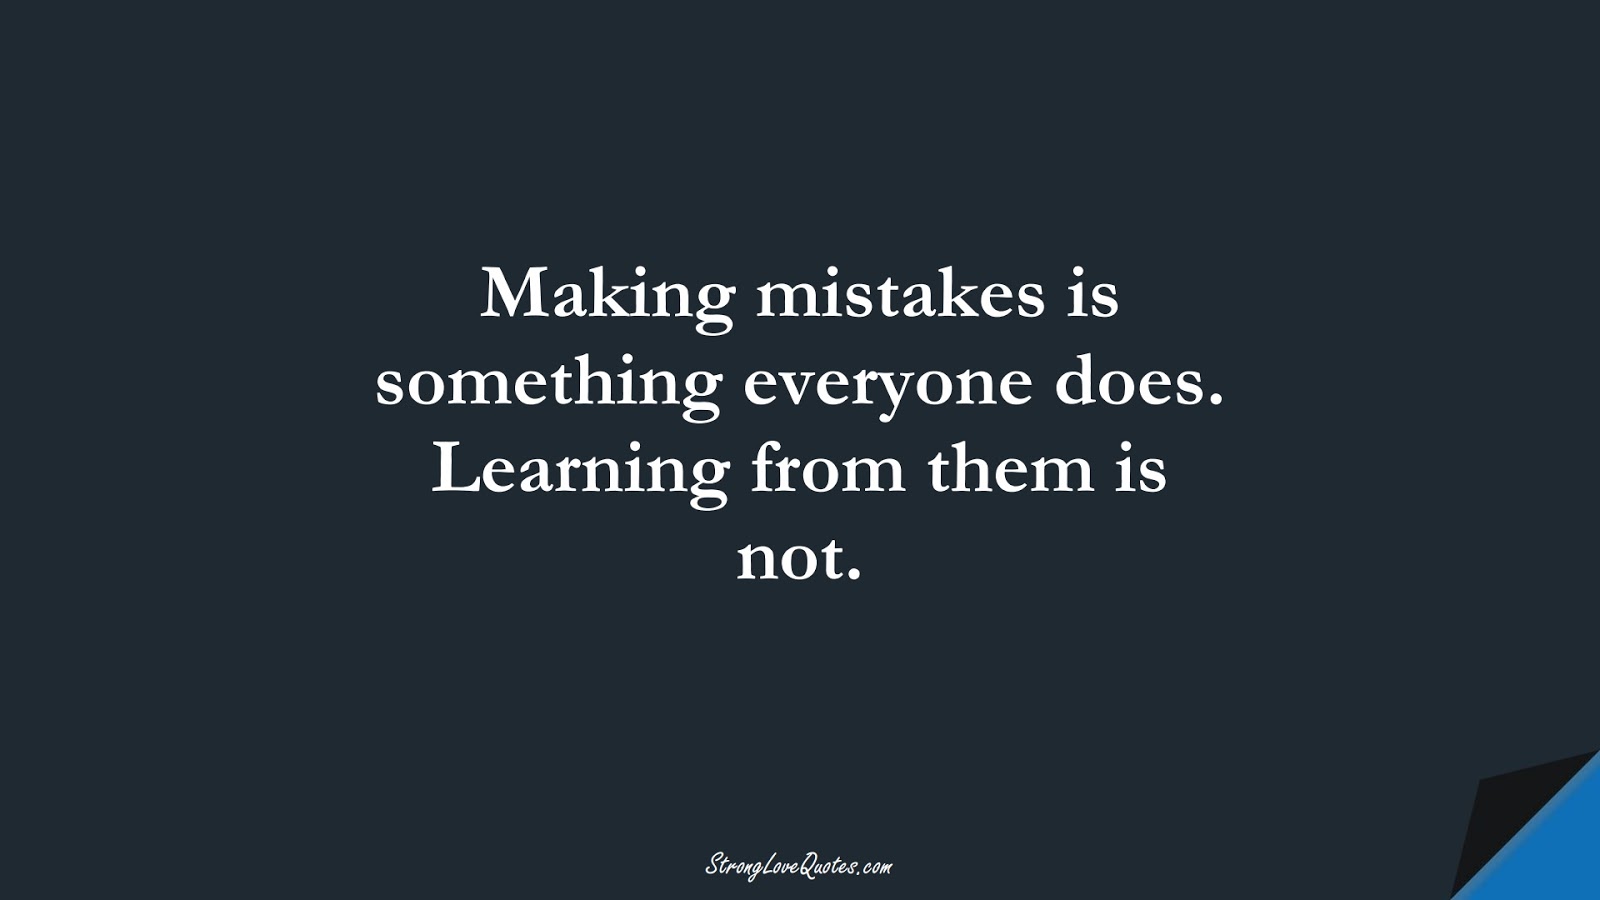 Making mistakes is something everyone does. Learning from them is not.FALSE